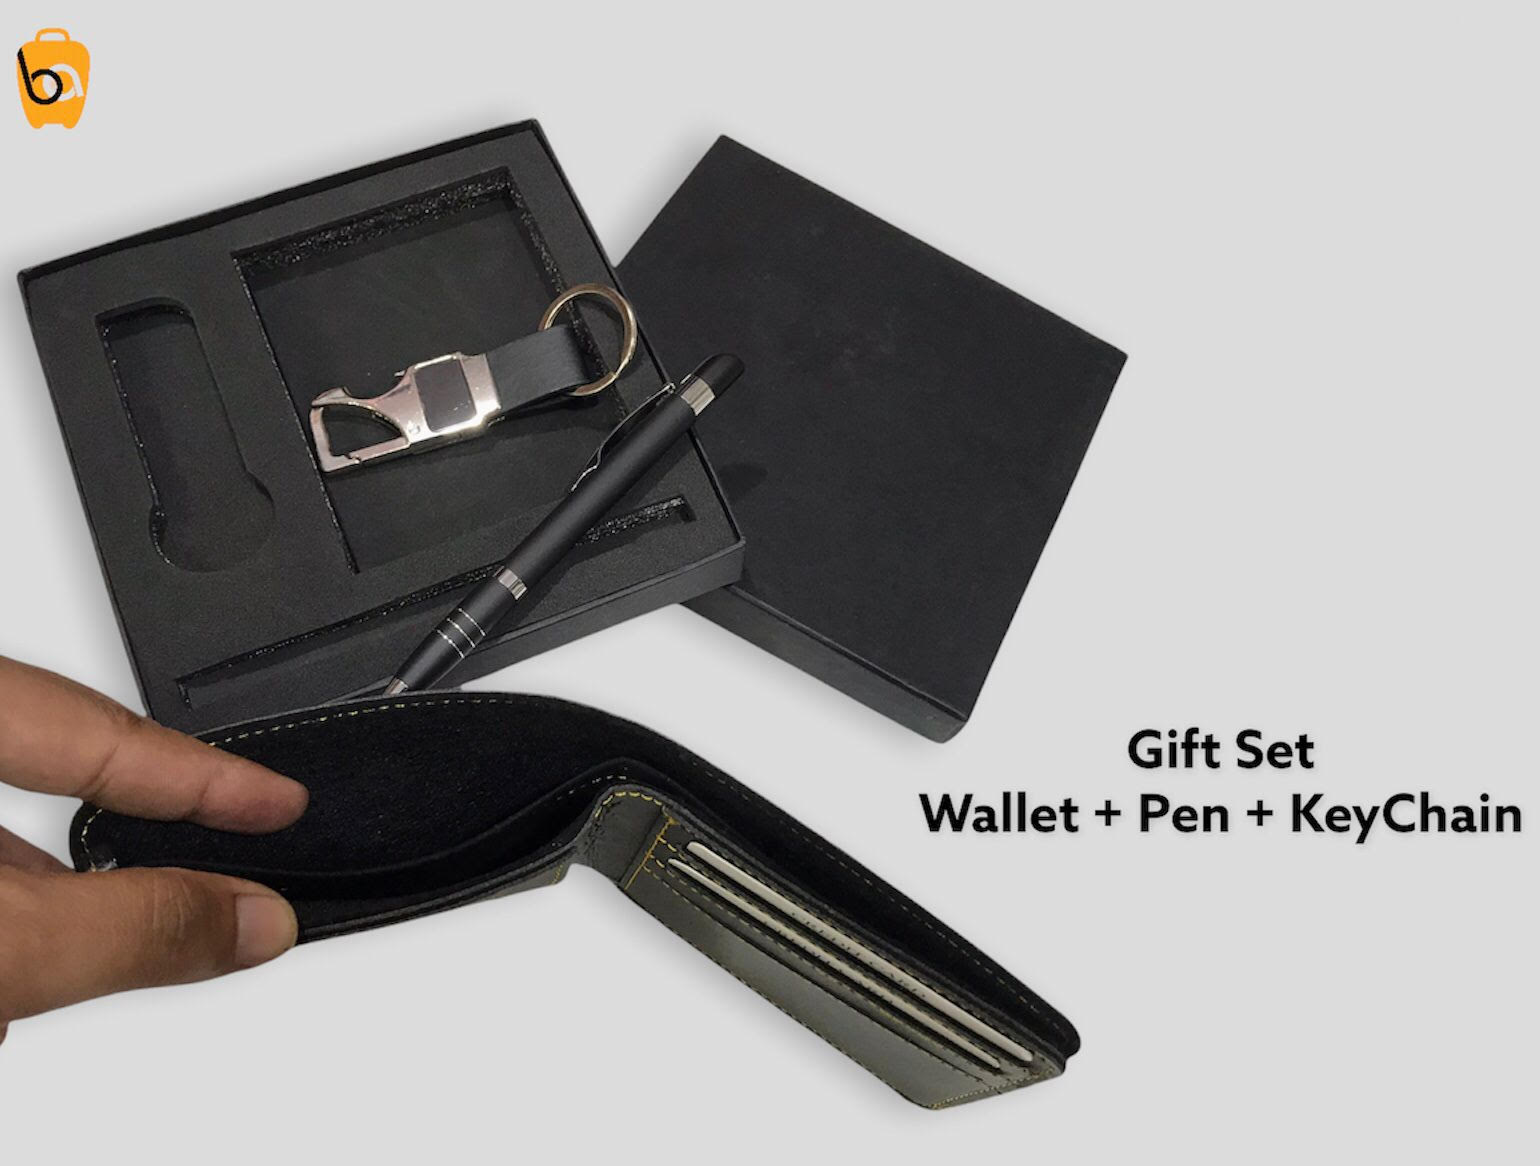 Buy Pen, Keychain and Cardholder 3in1 Combo Gift Set - For Employee Joining  Kit, Corporate, Client or Dealer Gifting, Promotional Freebie JKSR125  online - The Gifting Marketplace